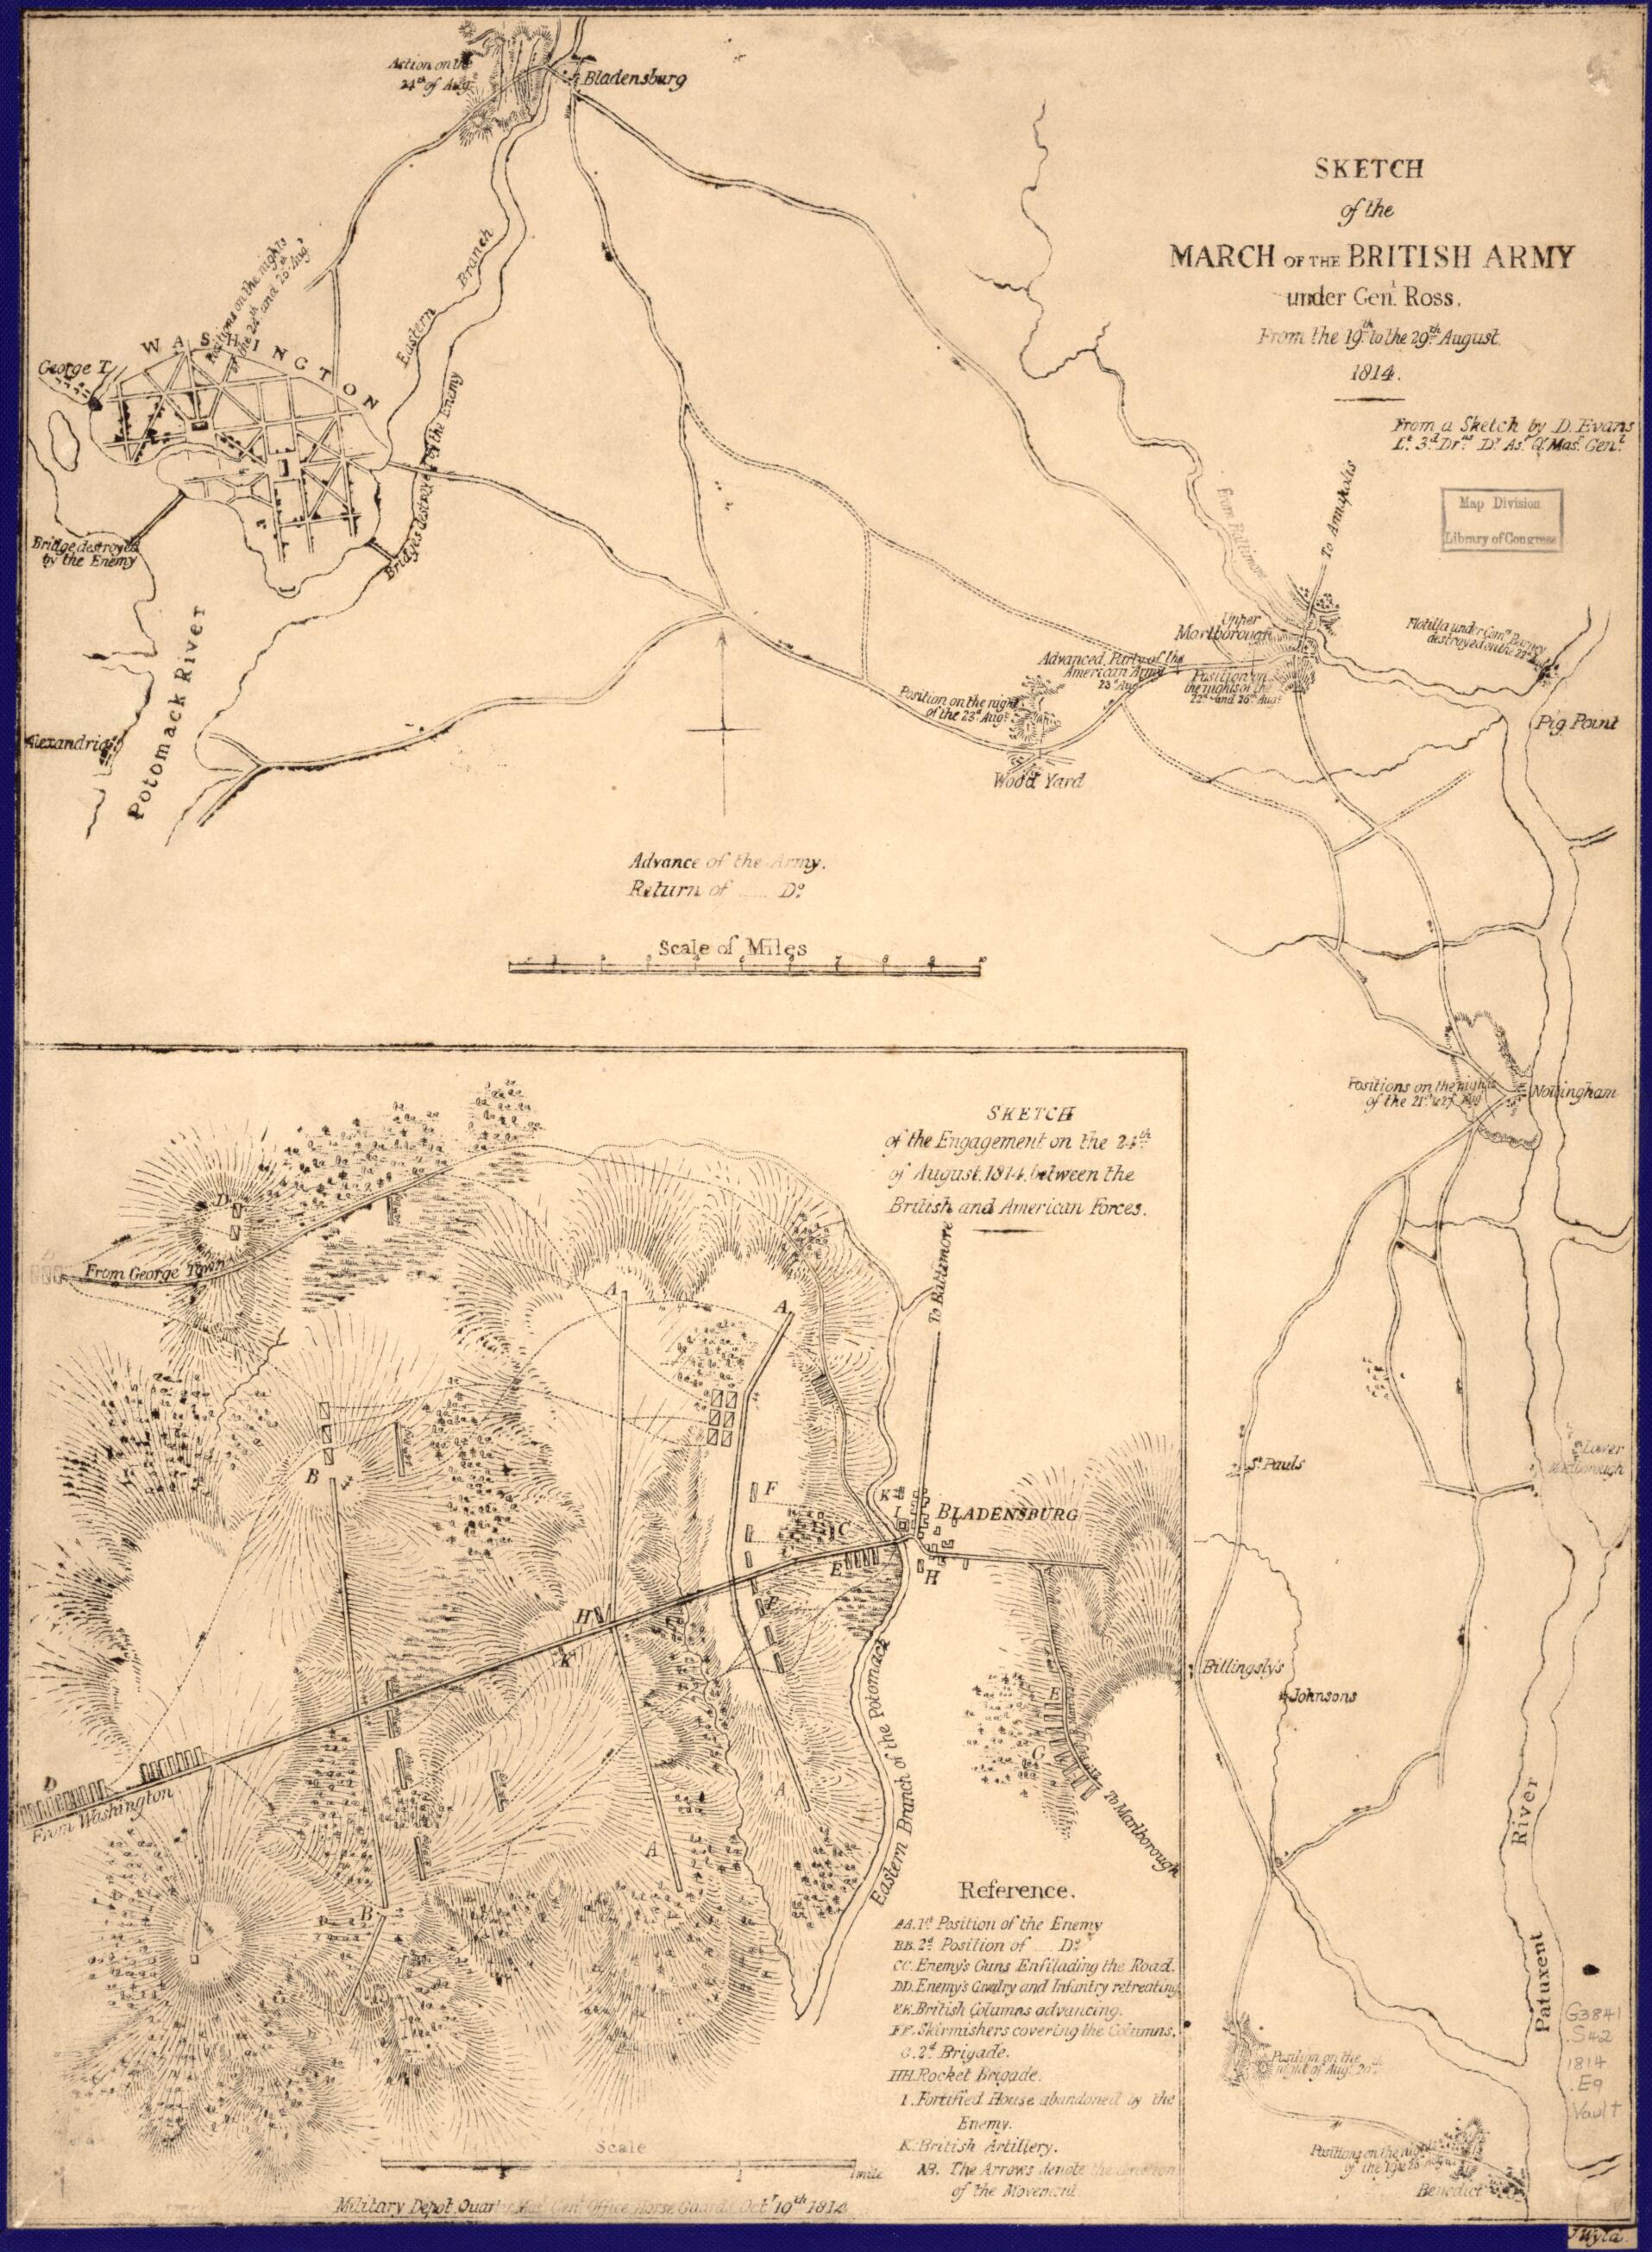 This old map of Sketch of the March of the British Army Under Gen&